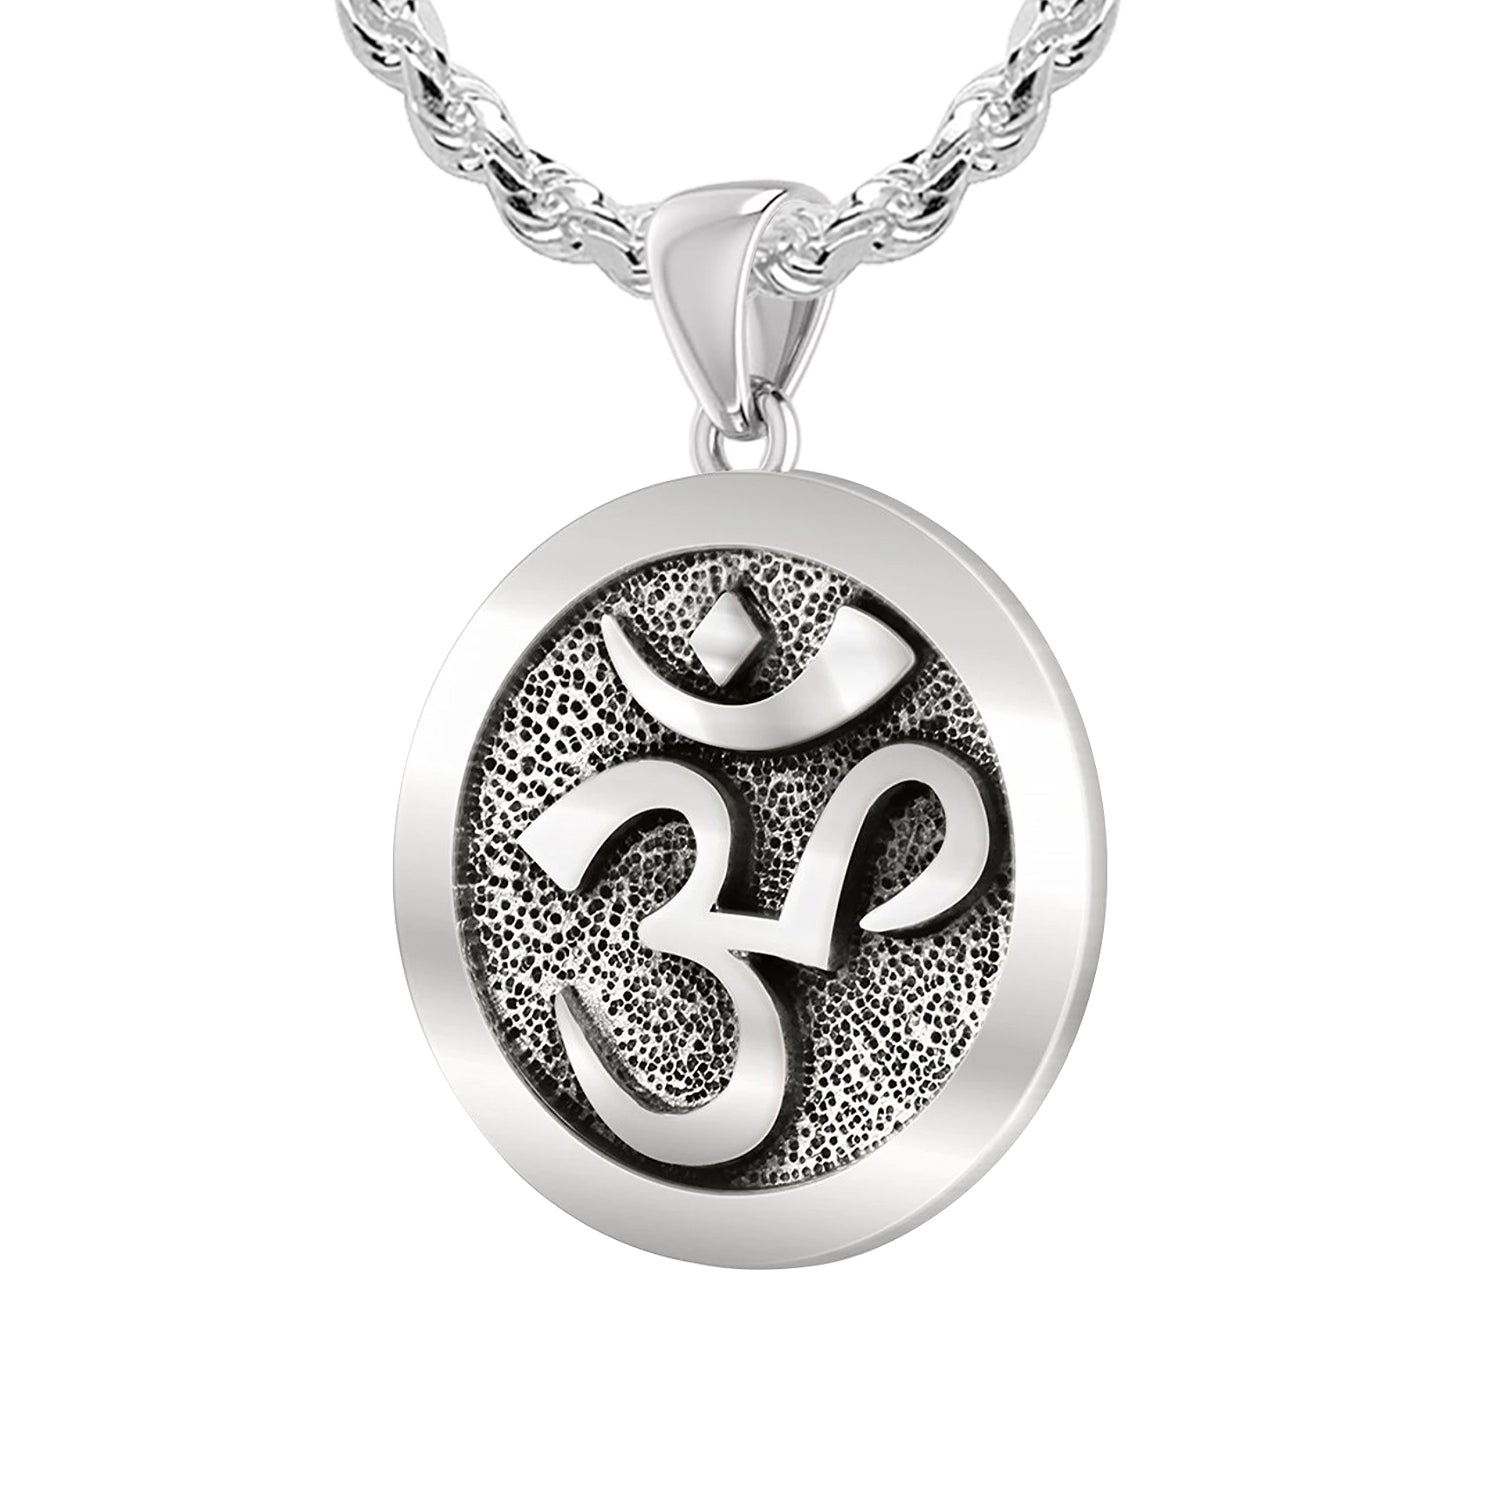 Locket Necklaces for Women Men Locket Necklace Can India